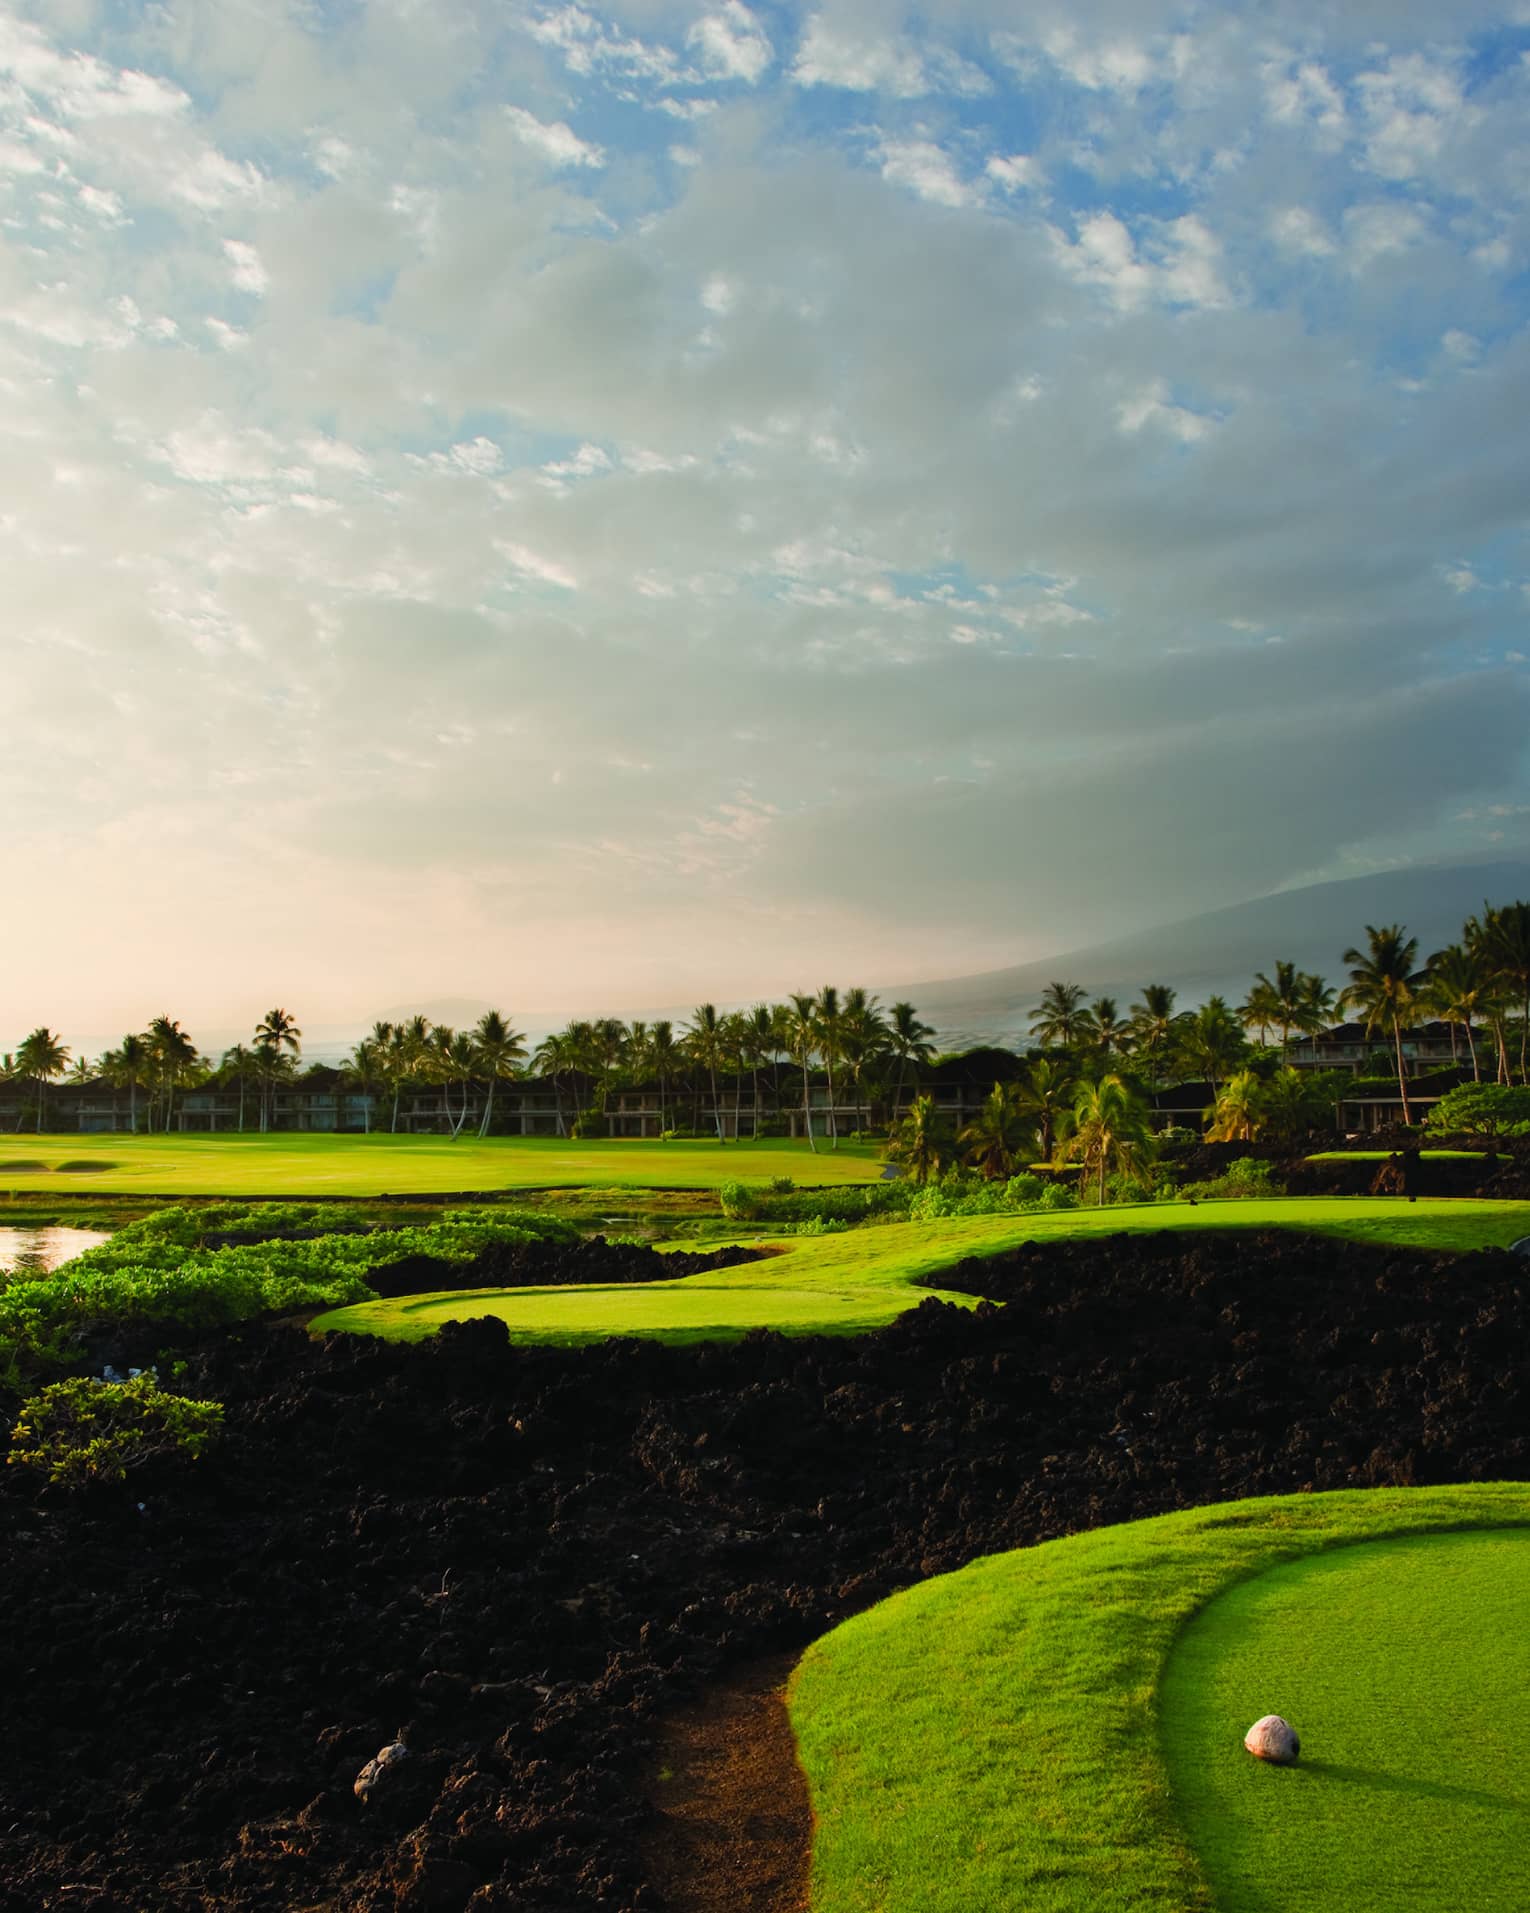 A picturesque golf course featuring bright green fairways, shrubs and distant palm trees under a rose-tinted clouded sky.